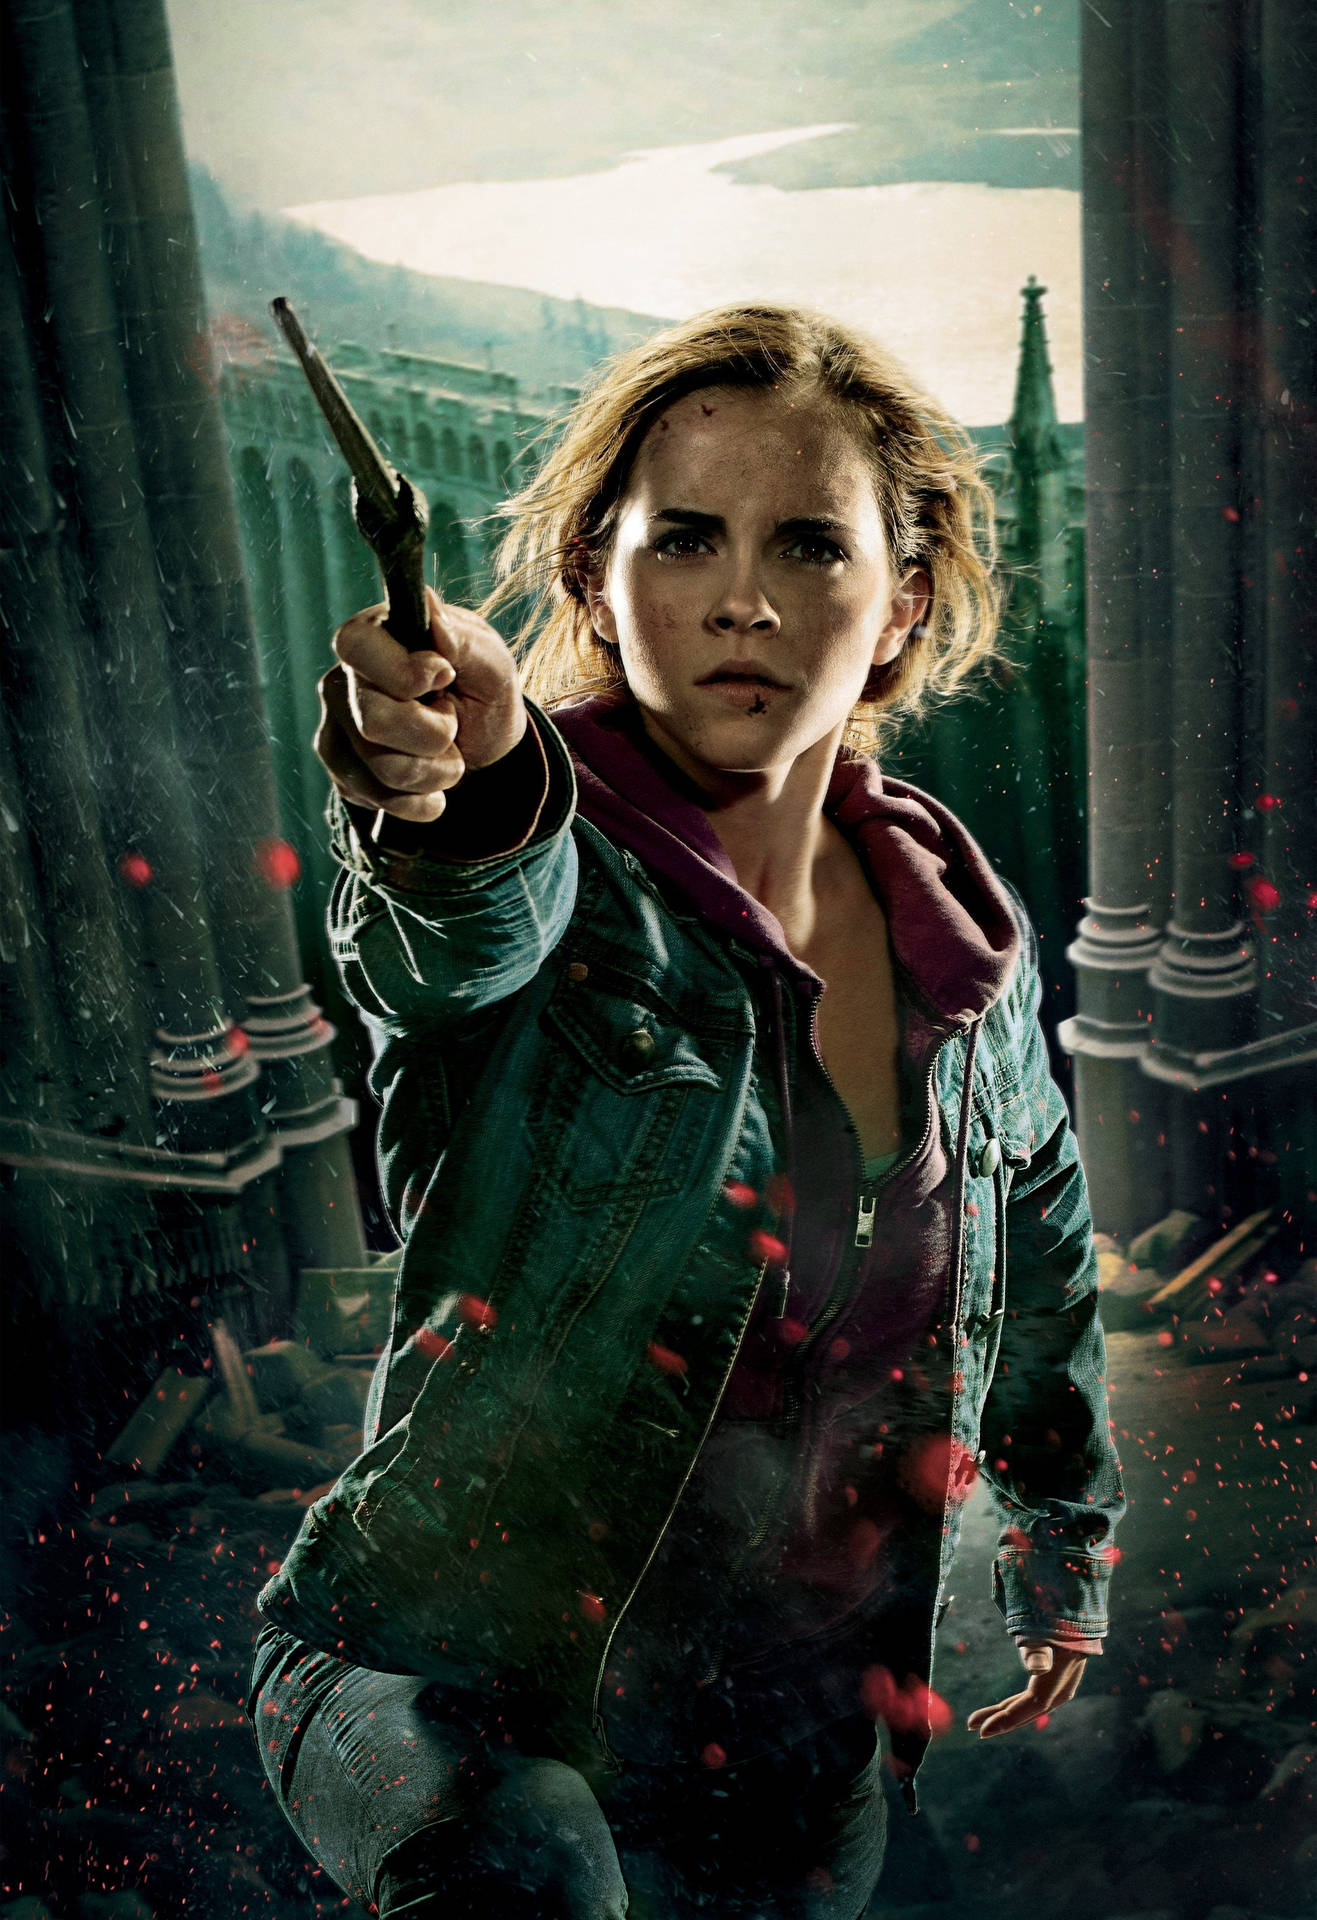 “Hermione Granger, the powerful witch” Wallpaper